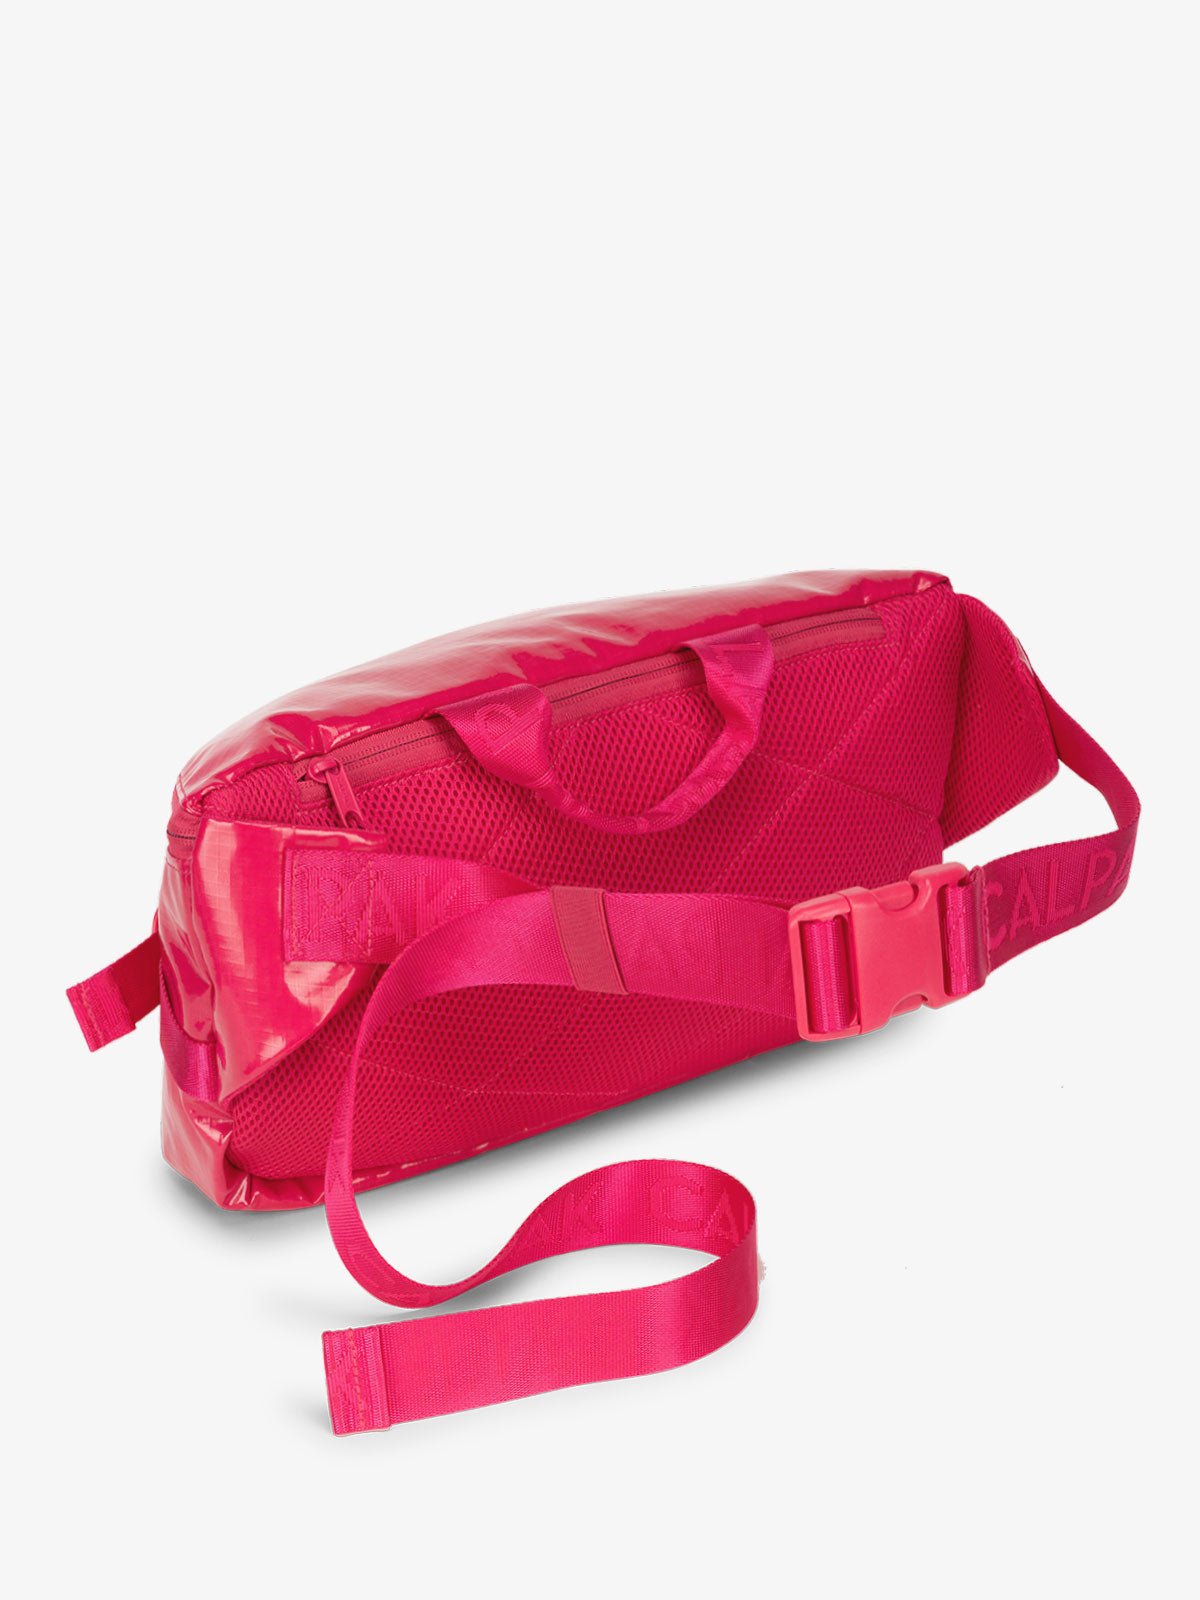 CALPAK Terra Sling Bag for women with adjustable crossbody strap and top handle in pink dragonfruit